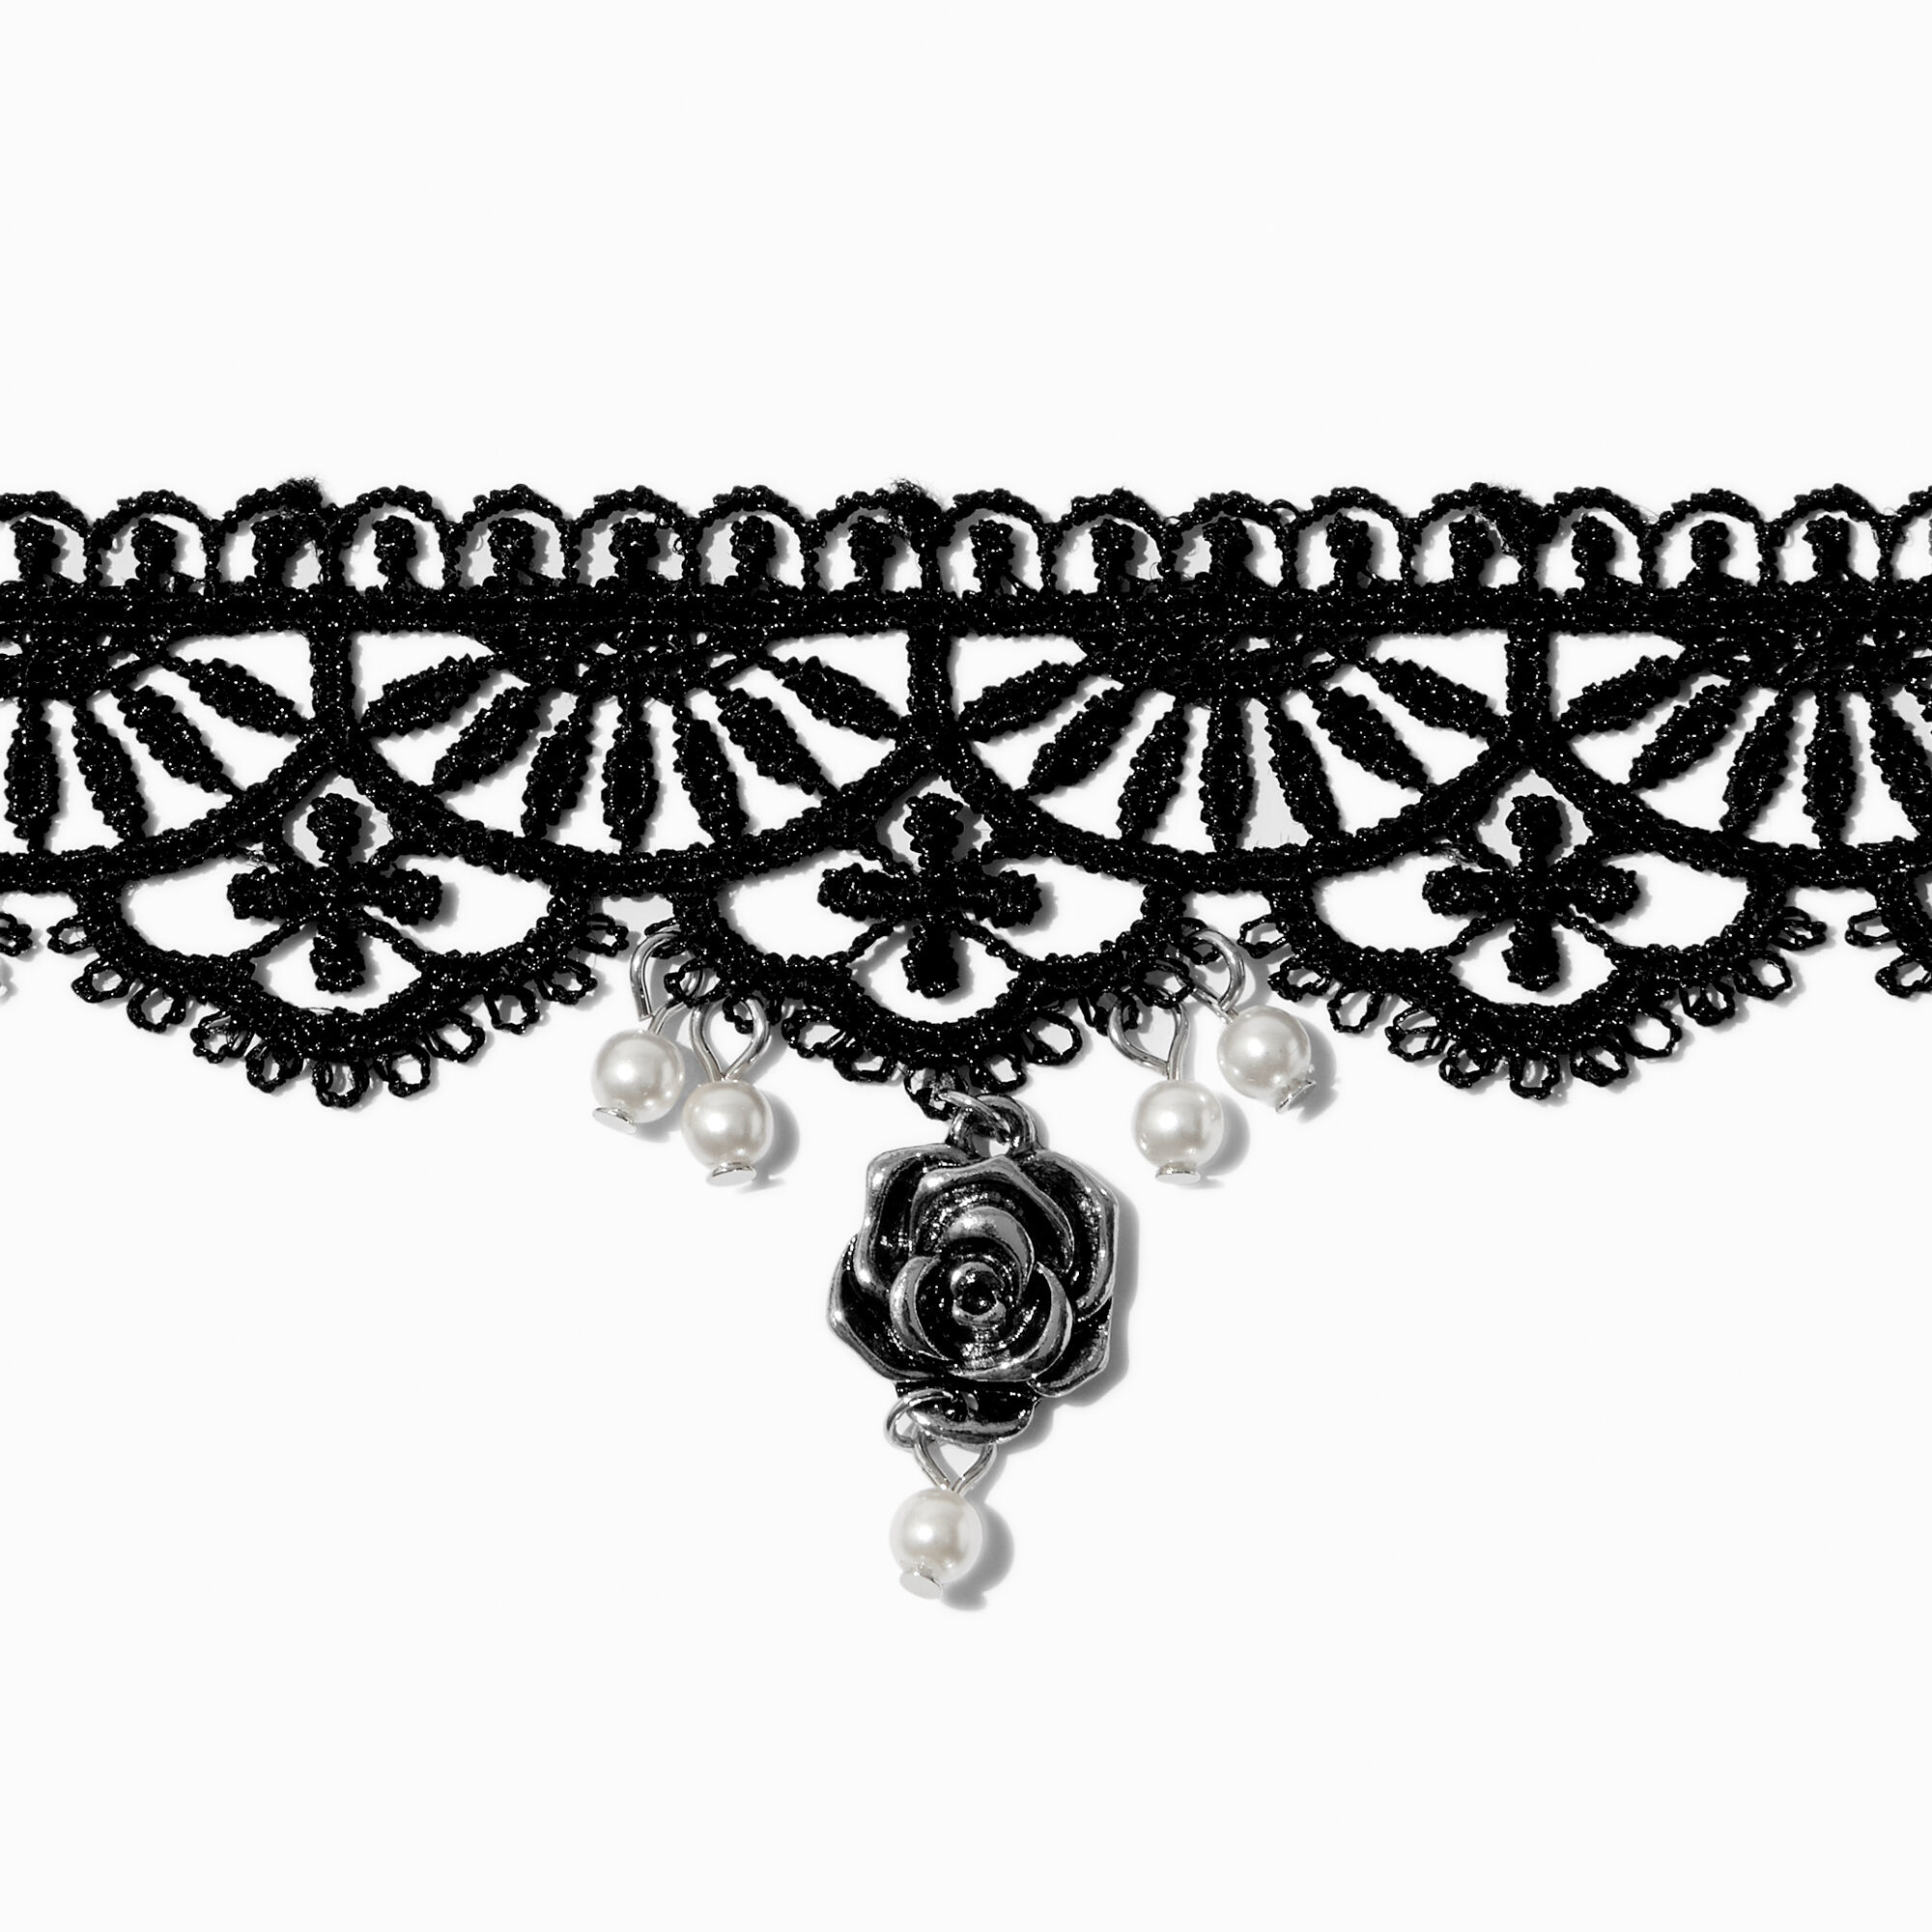 View Claires Lace Rose Choker Necklace Black information